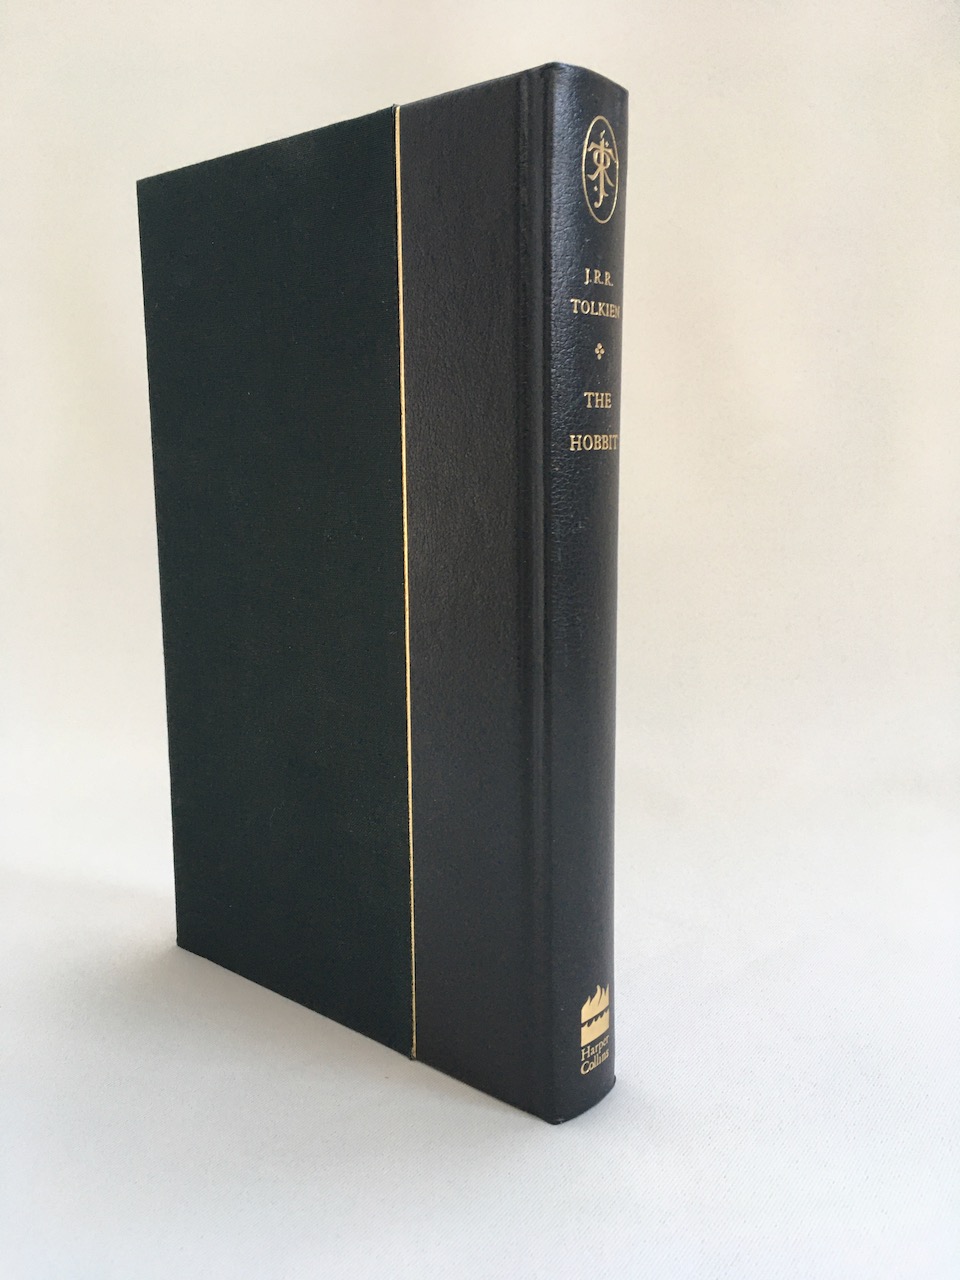  The Hobbit by J.R.R. Tolkien, 1999 Limited Edition, one of 2500 copies 18